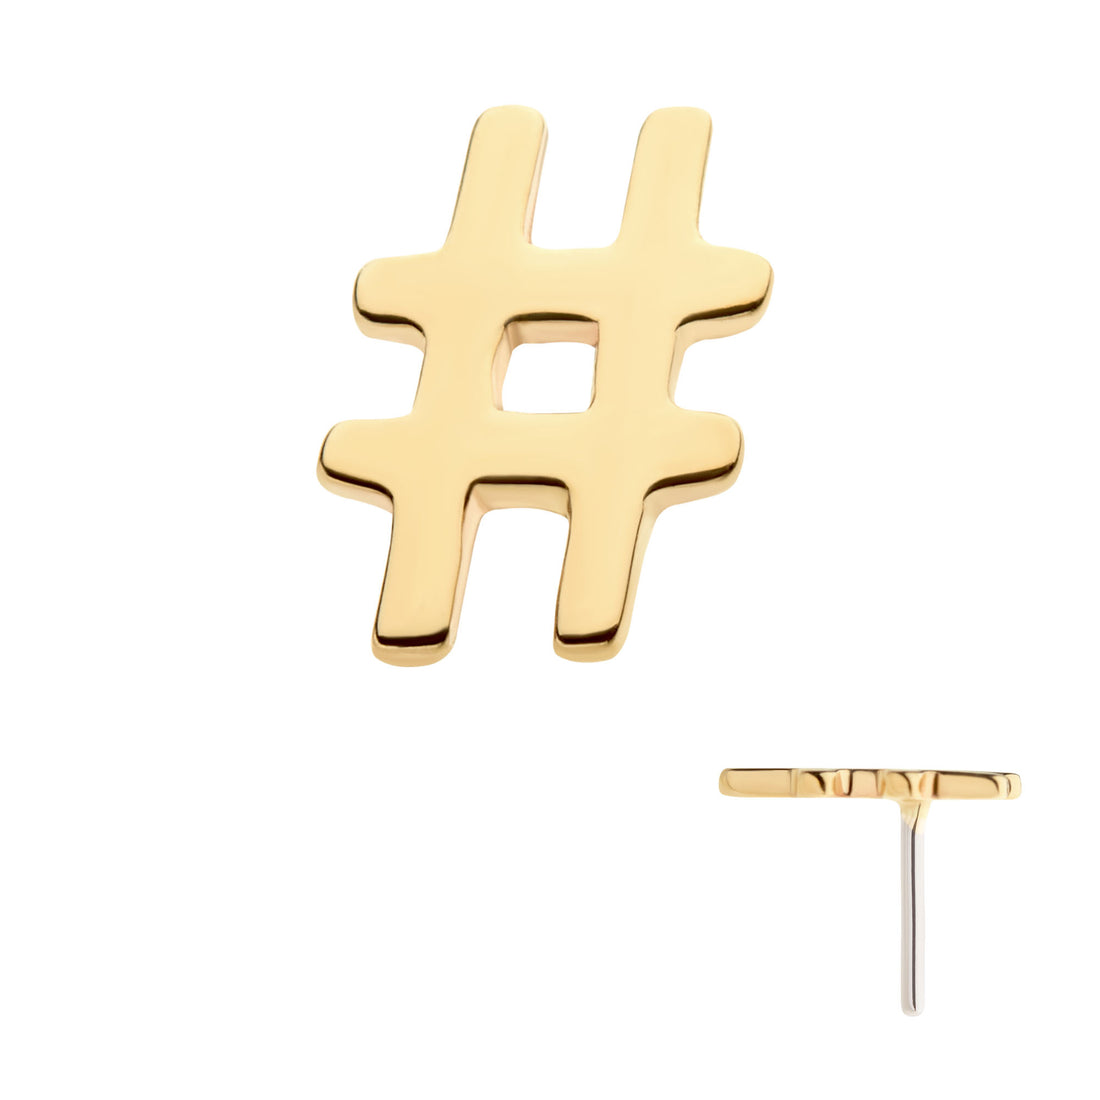 14Kt Gold Threadless with Hashtag Symbol Top